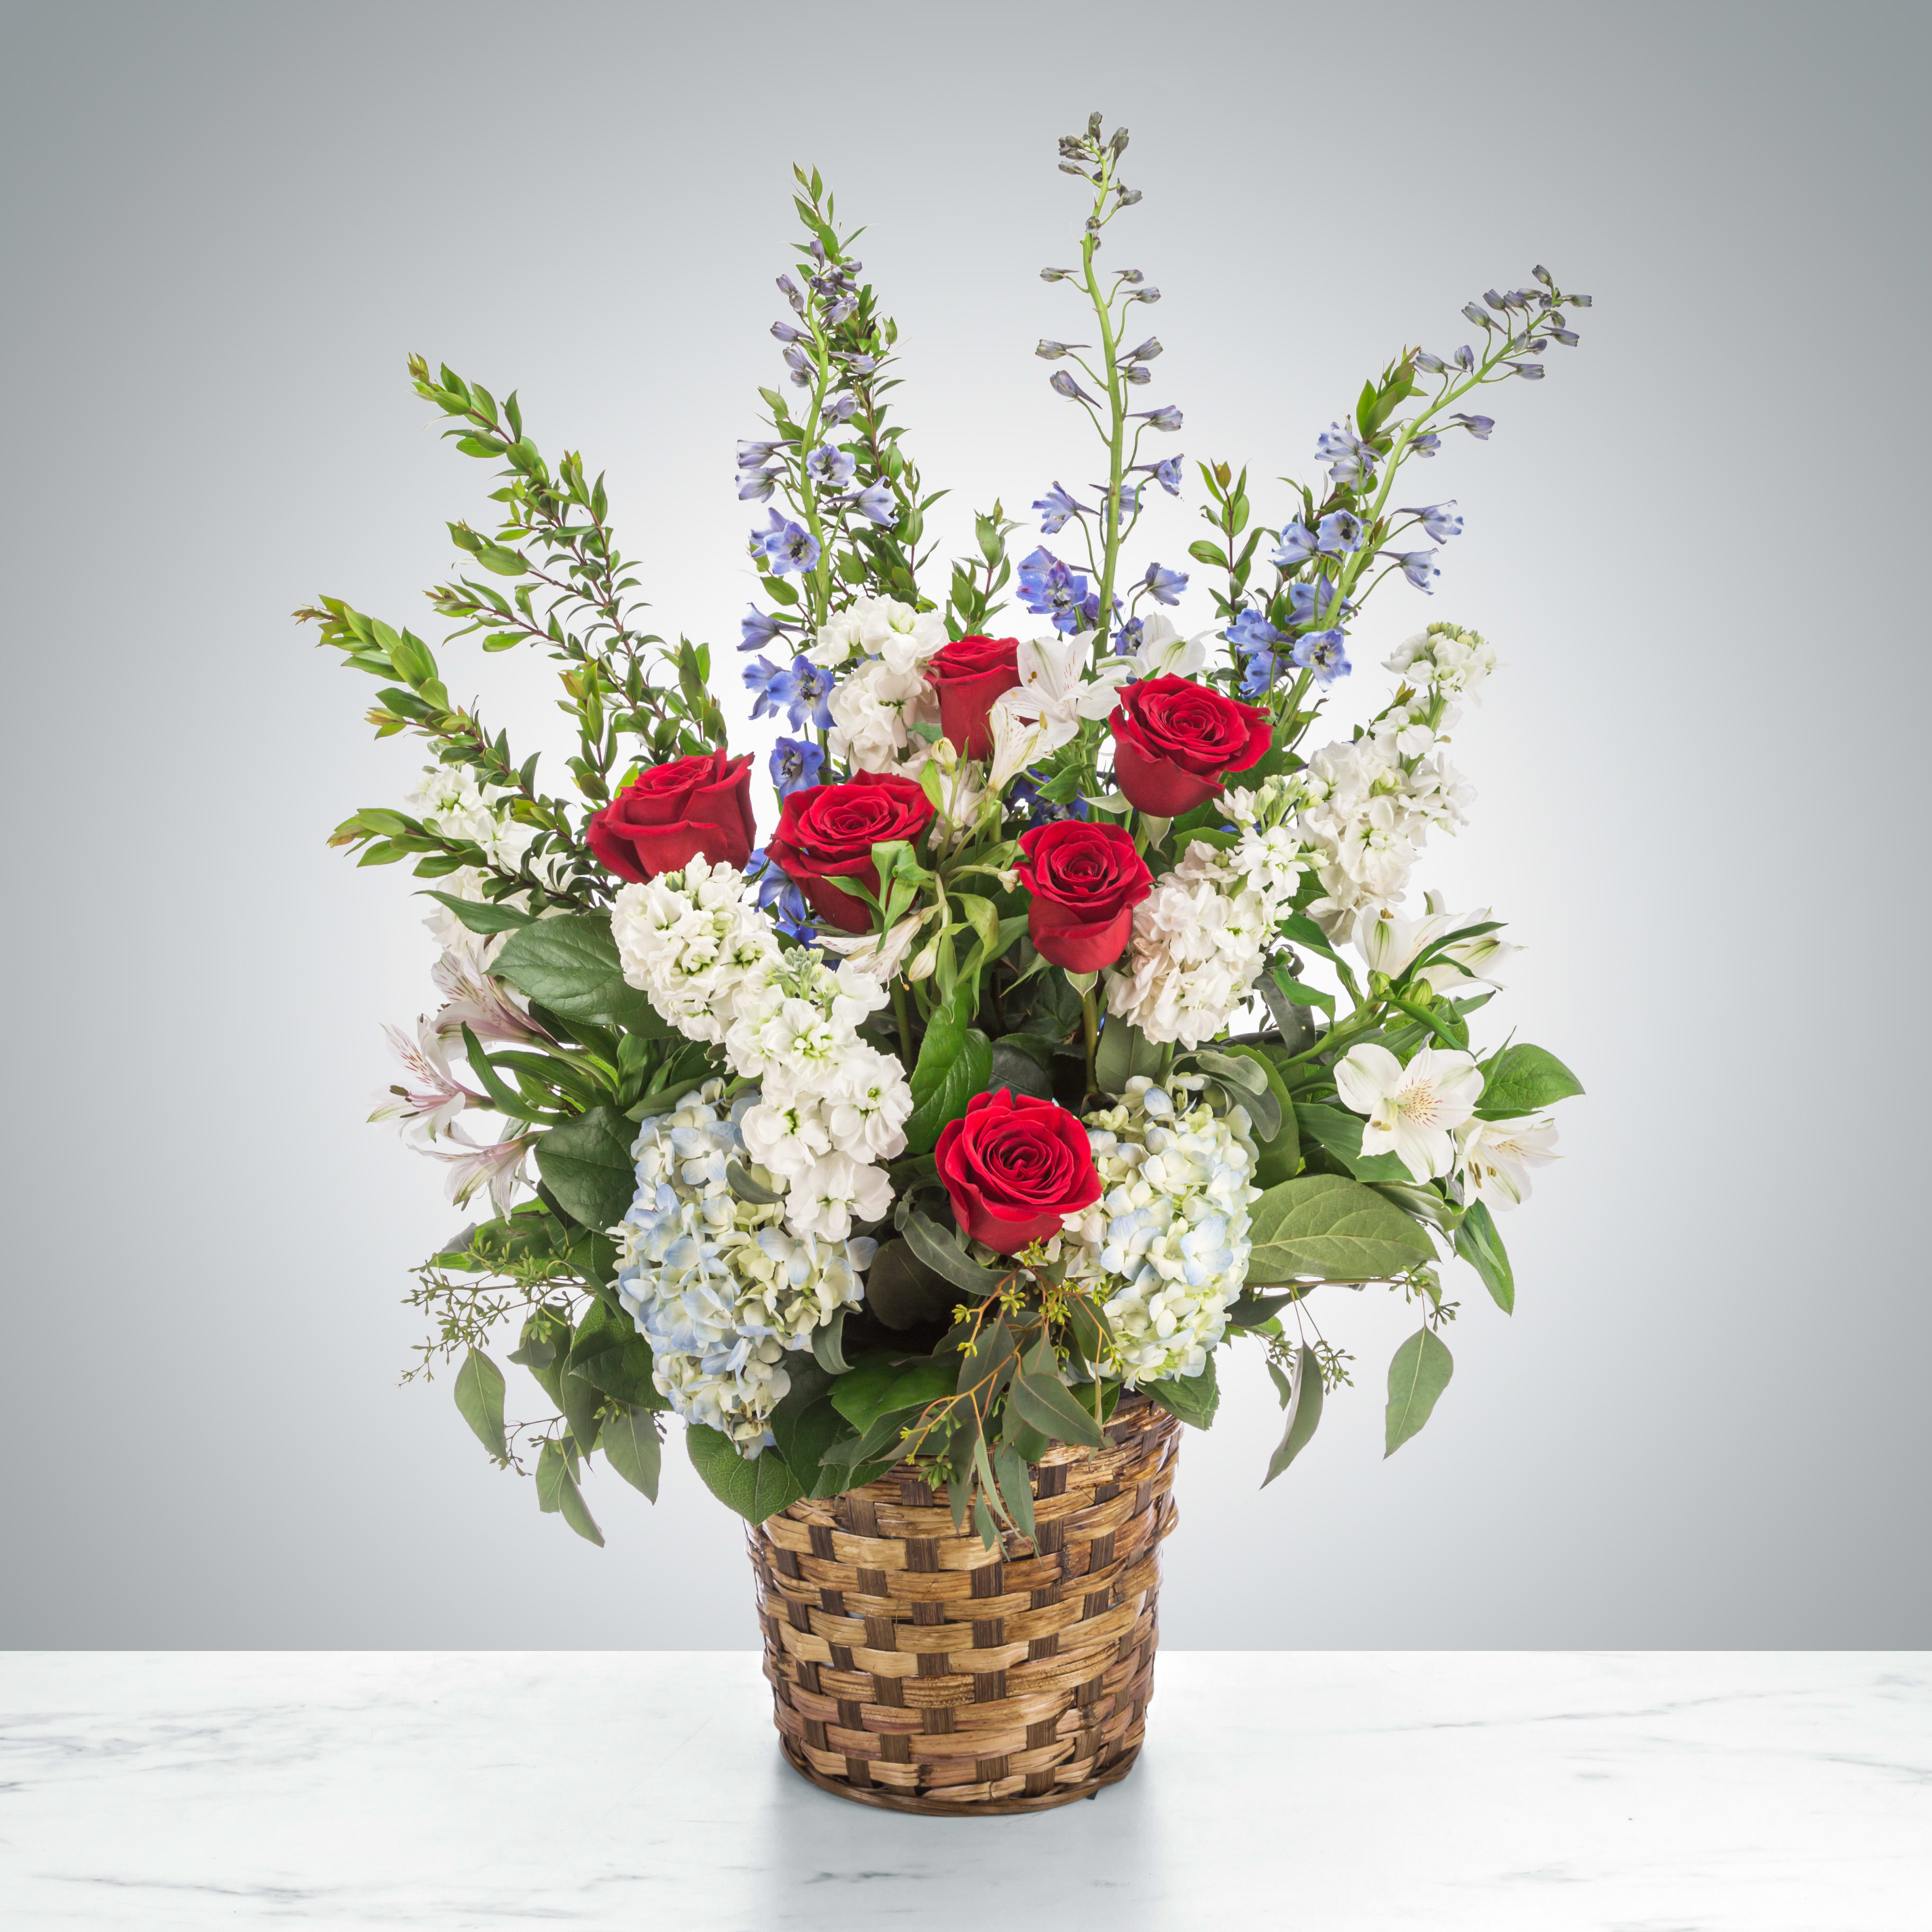 Forever Remembered by BloomNation™ - A red, white, and blue tribute funeral basket featuring red roses, blue hydrangea, blue delphinium, and white stock. Fitting for any type of funeral ceremony.